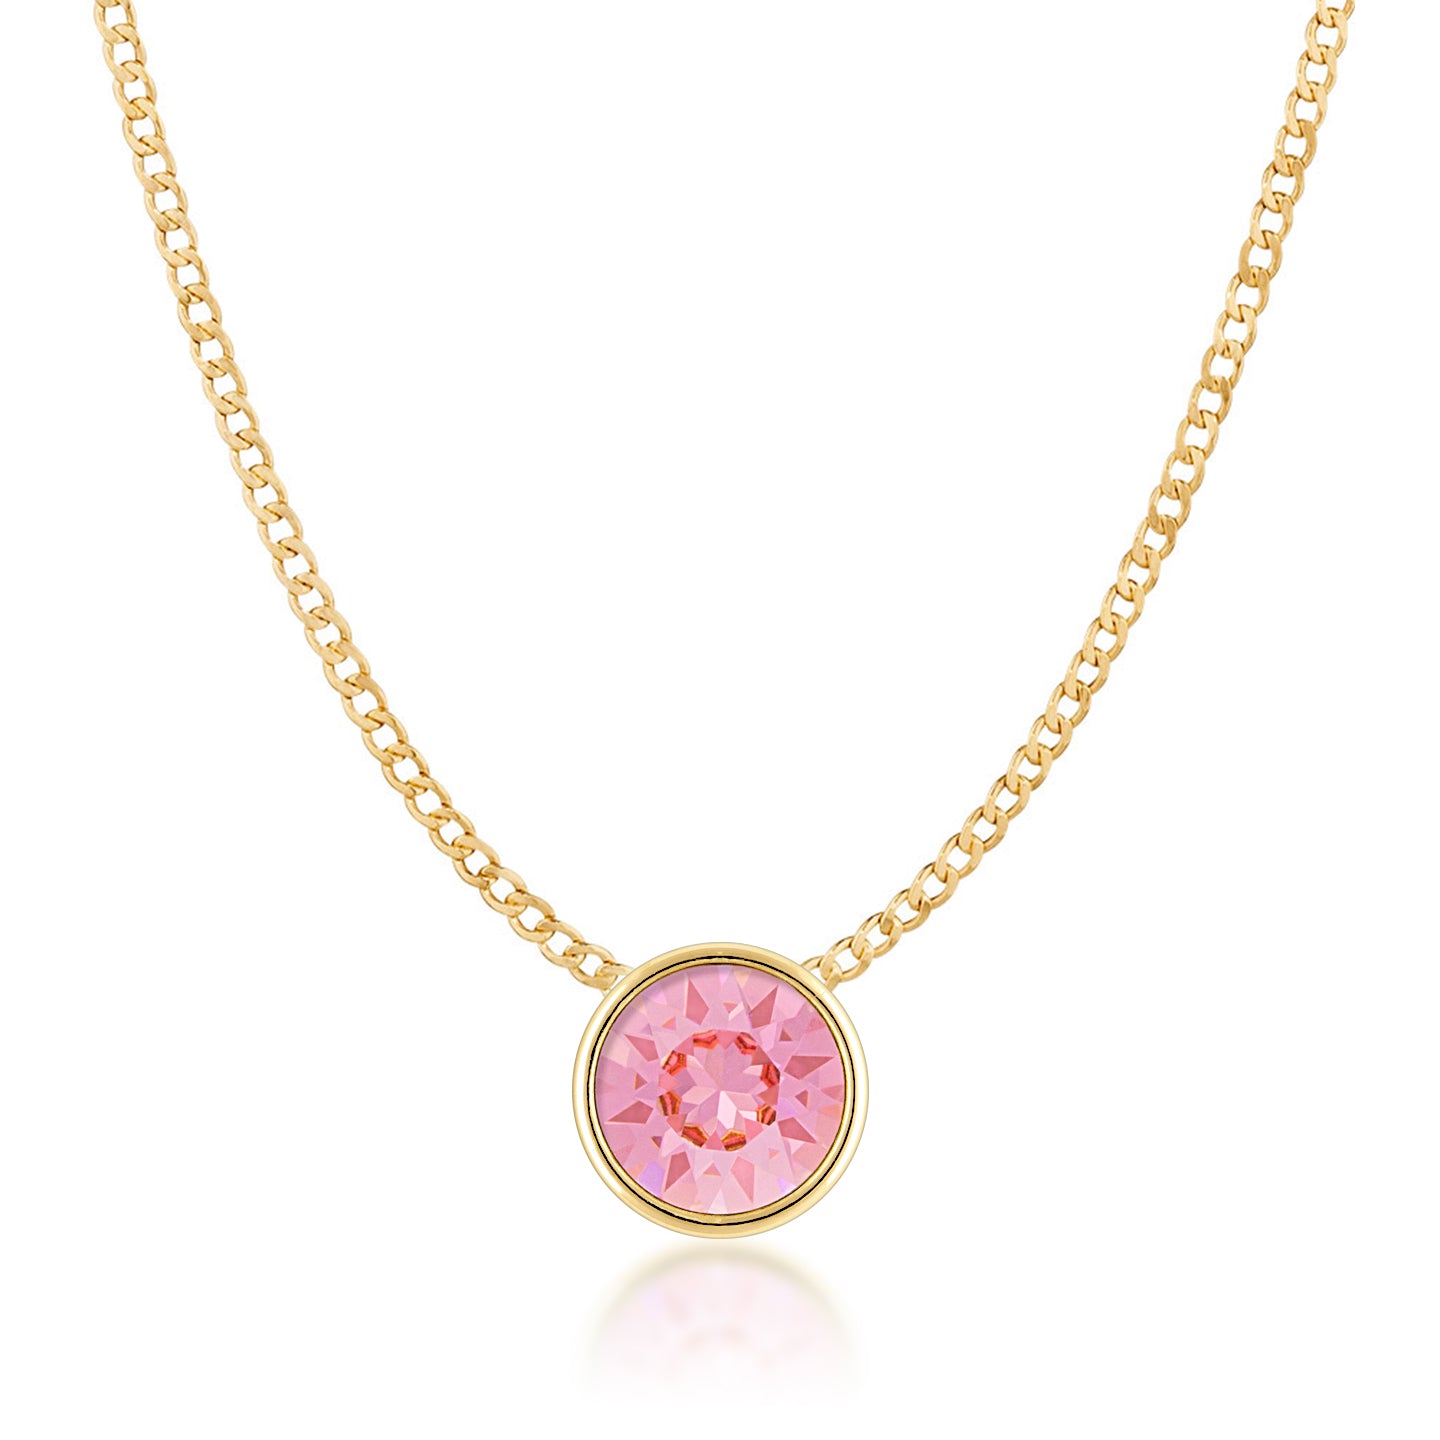 Harley Small Pendant Necklace with Pink Light Rose Round Crystals from Swarovski Gold Plated - Ed Heart